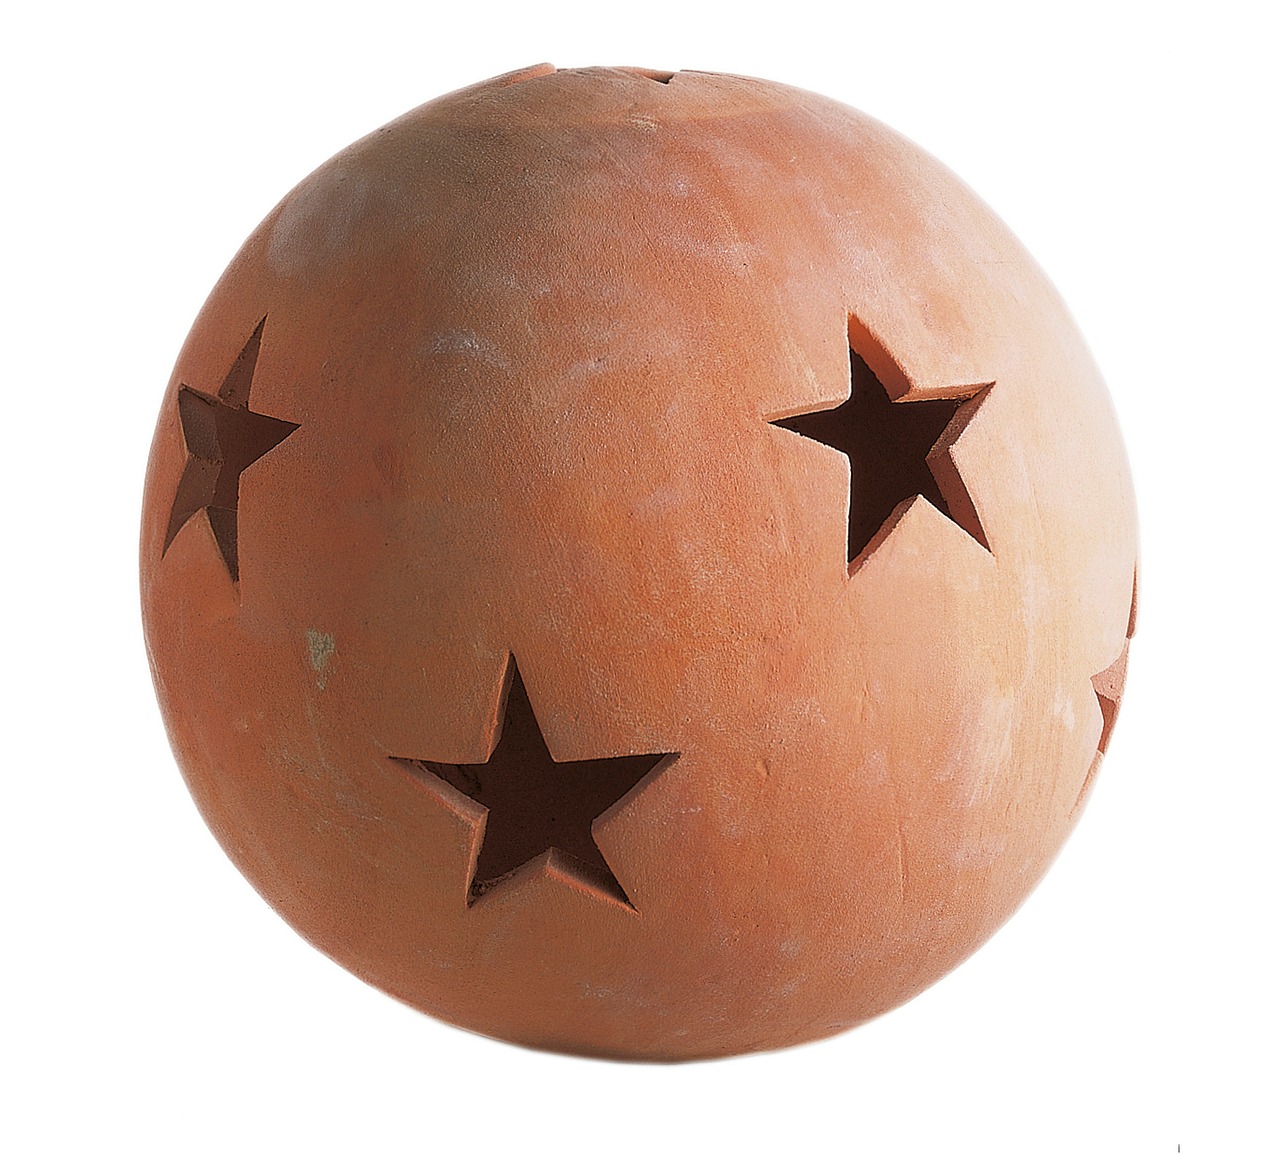 terracotta ball solid ball of clay free photo